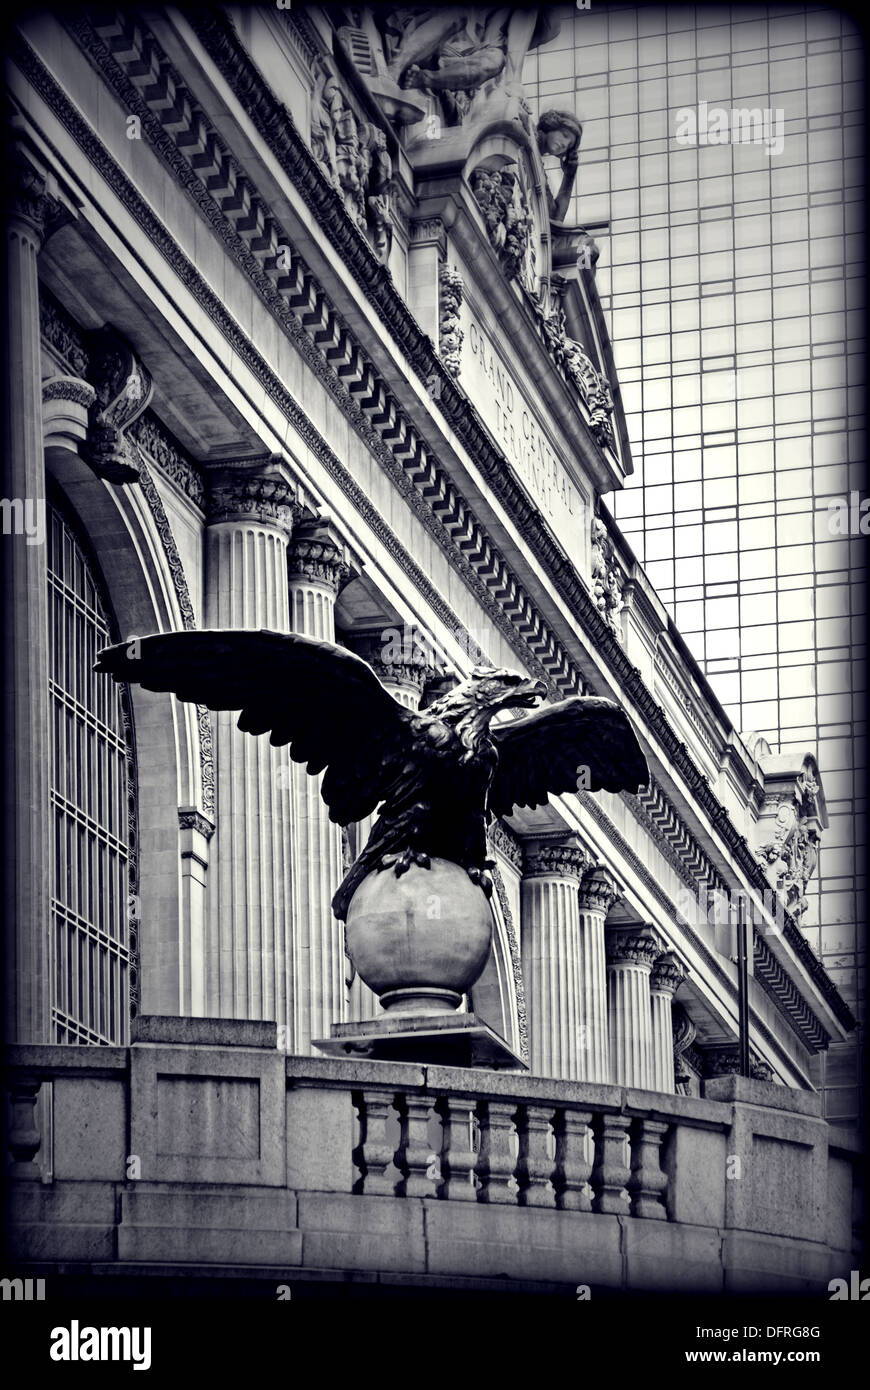 Eagle statue on the facade of Grand Central Terminal train station in New York City Stock Photo